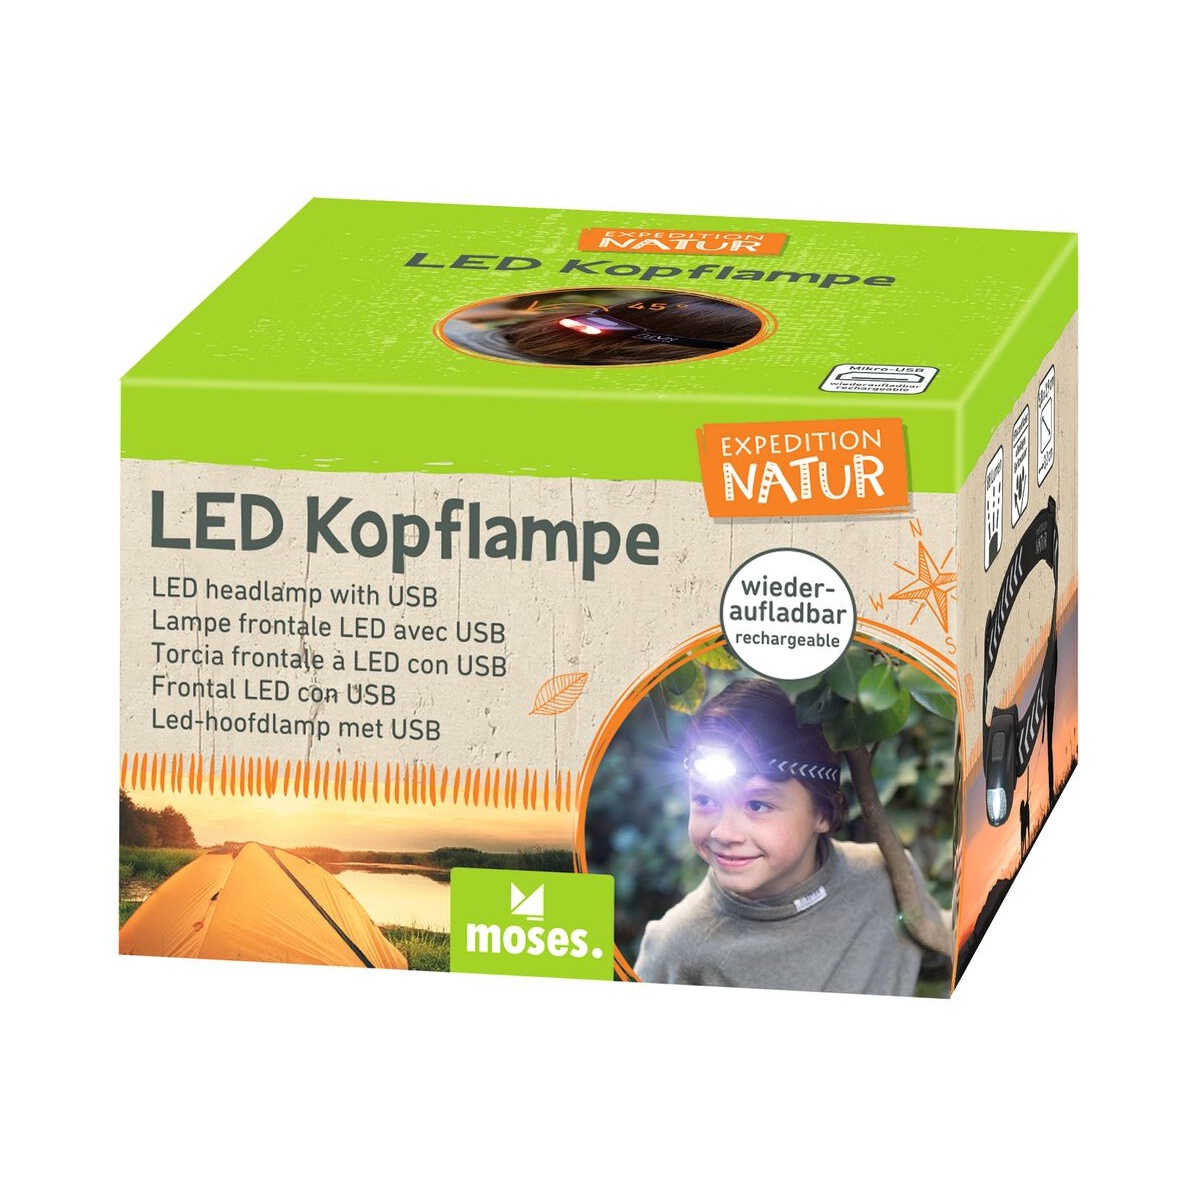 Expedition Natur LED Kopflampe von Moses